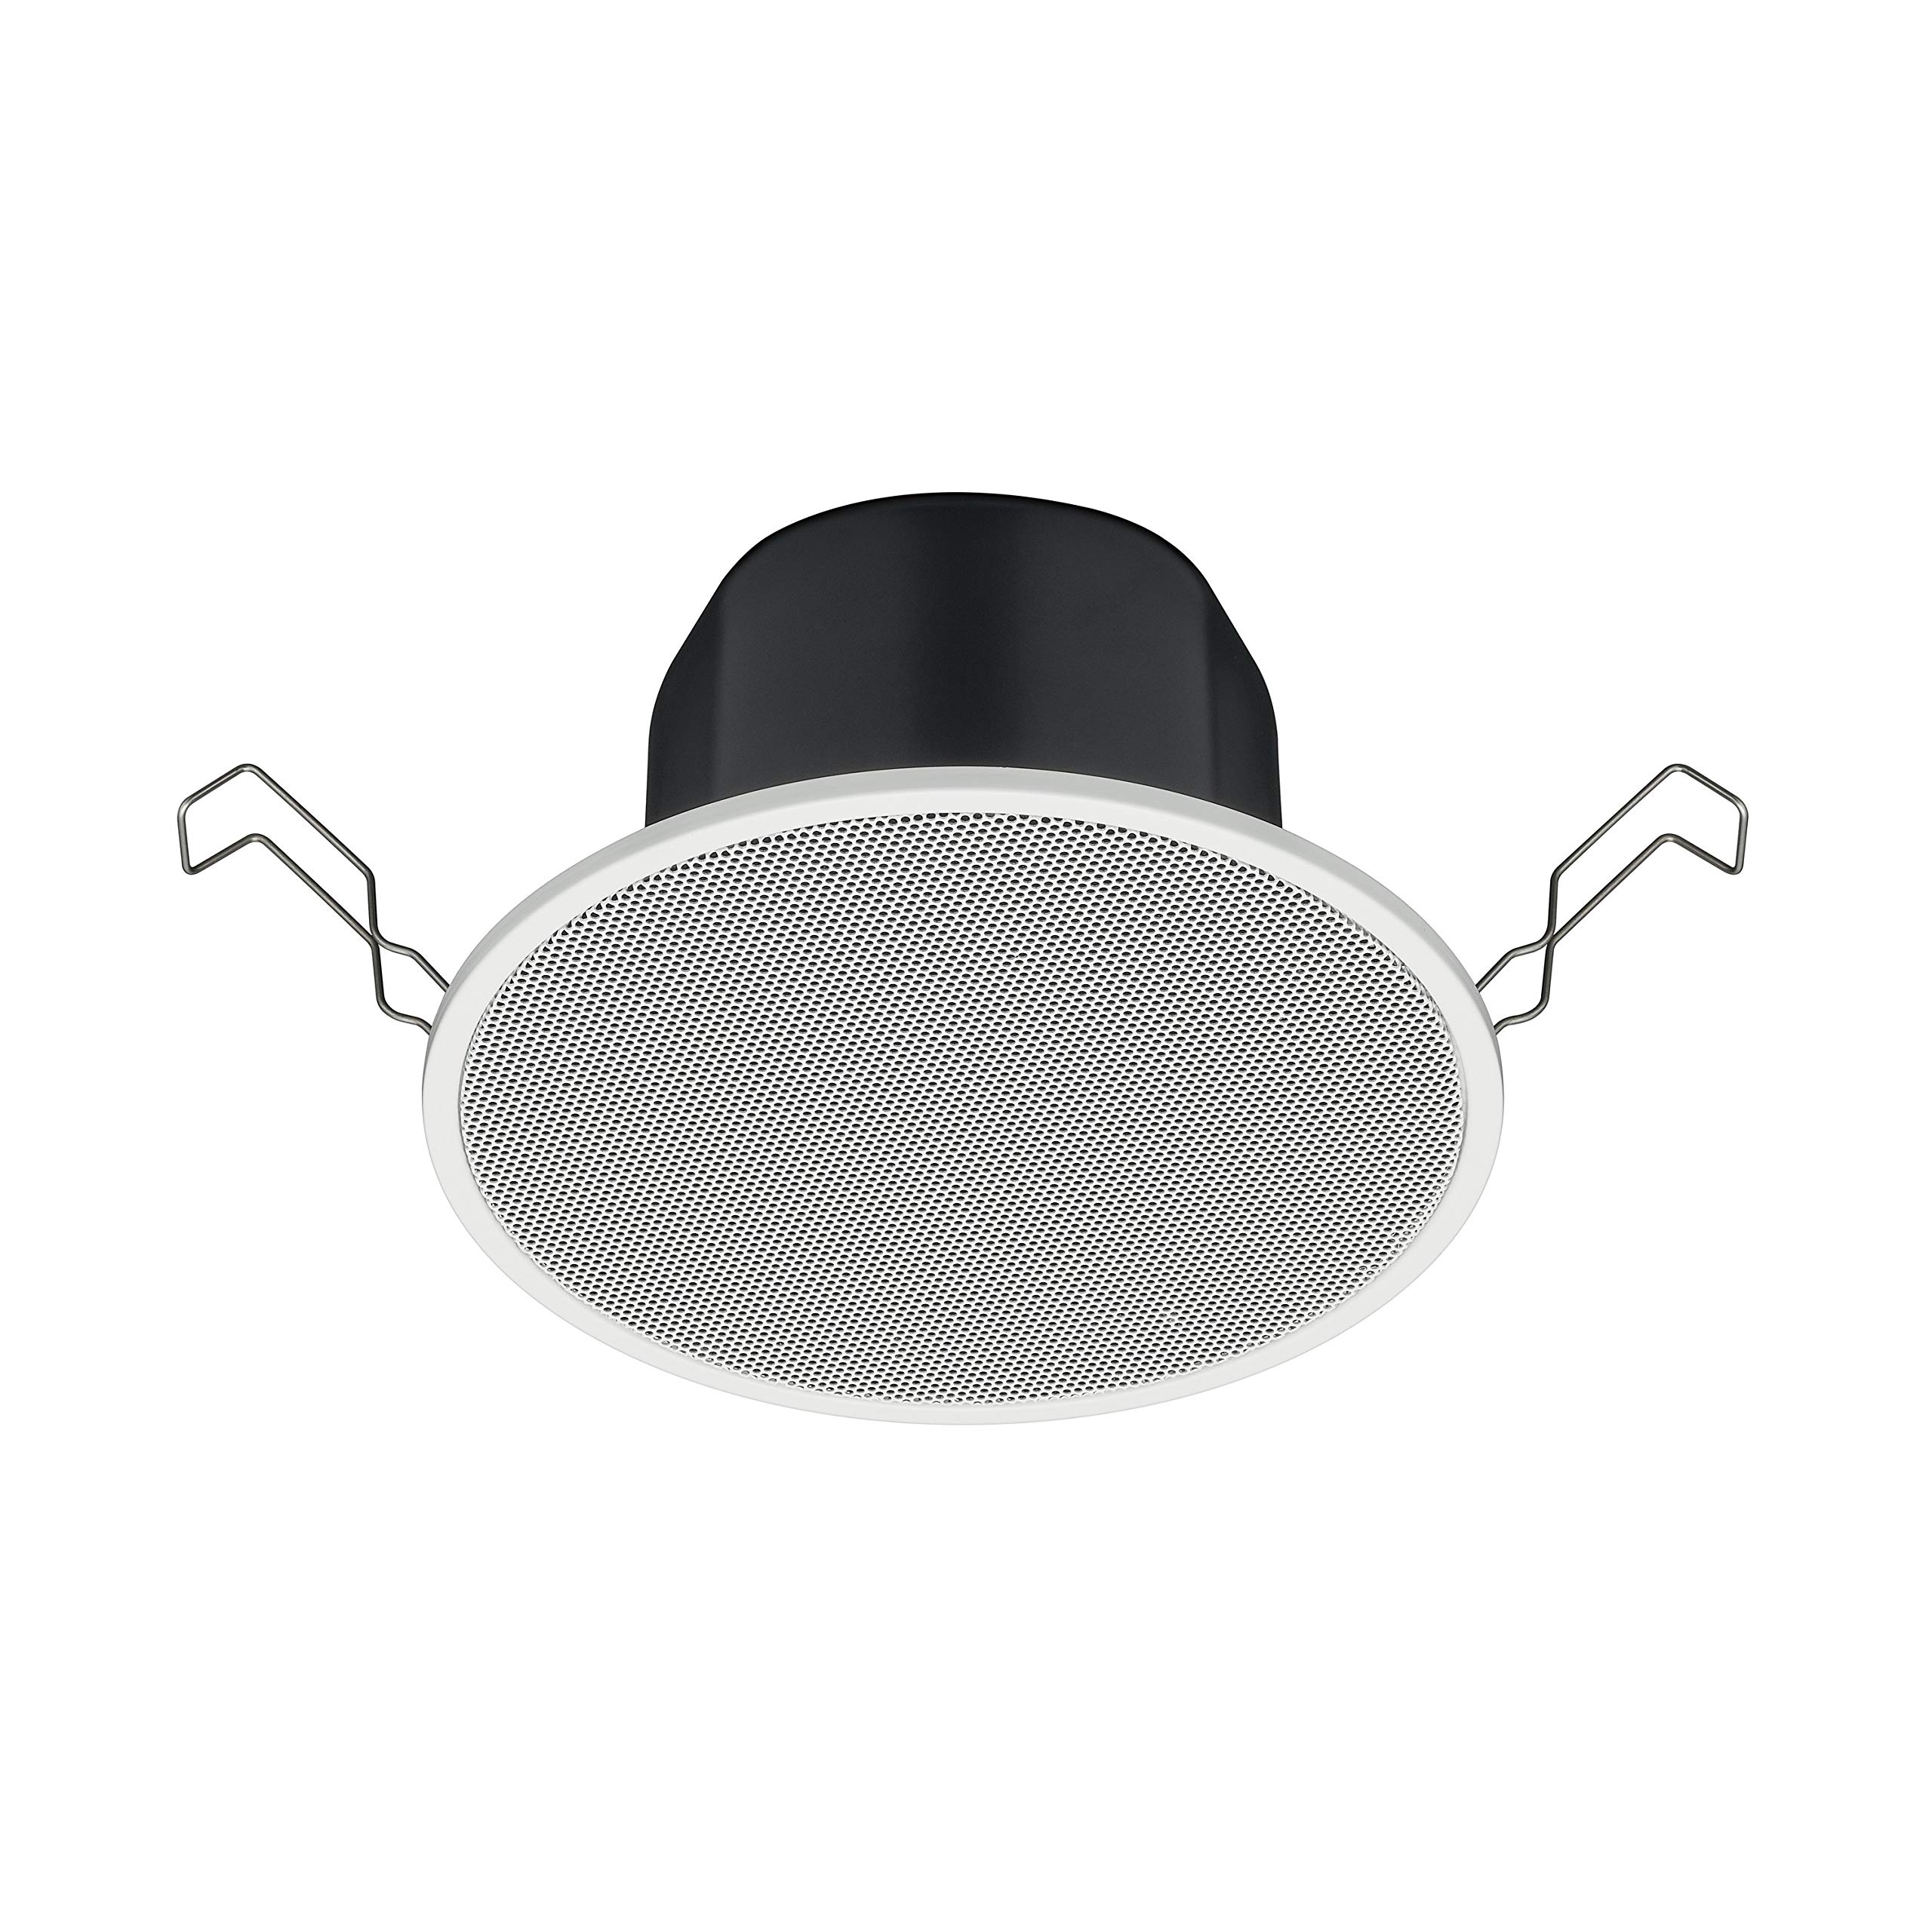 PC-1860F Ceiling Mount Fire Dome Speaker